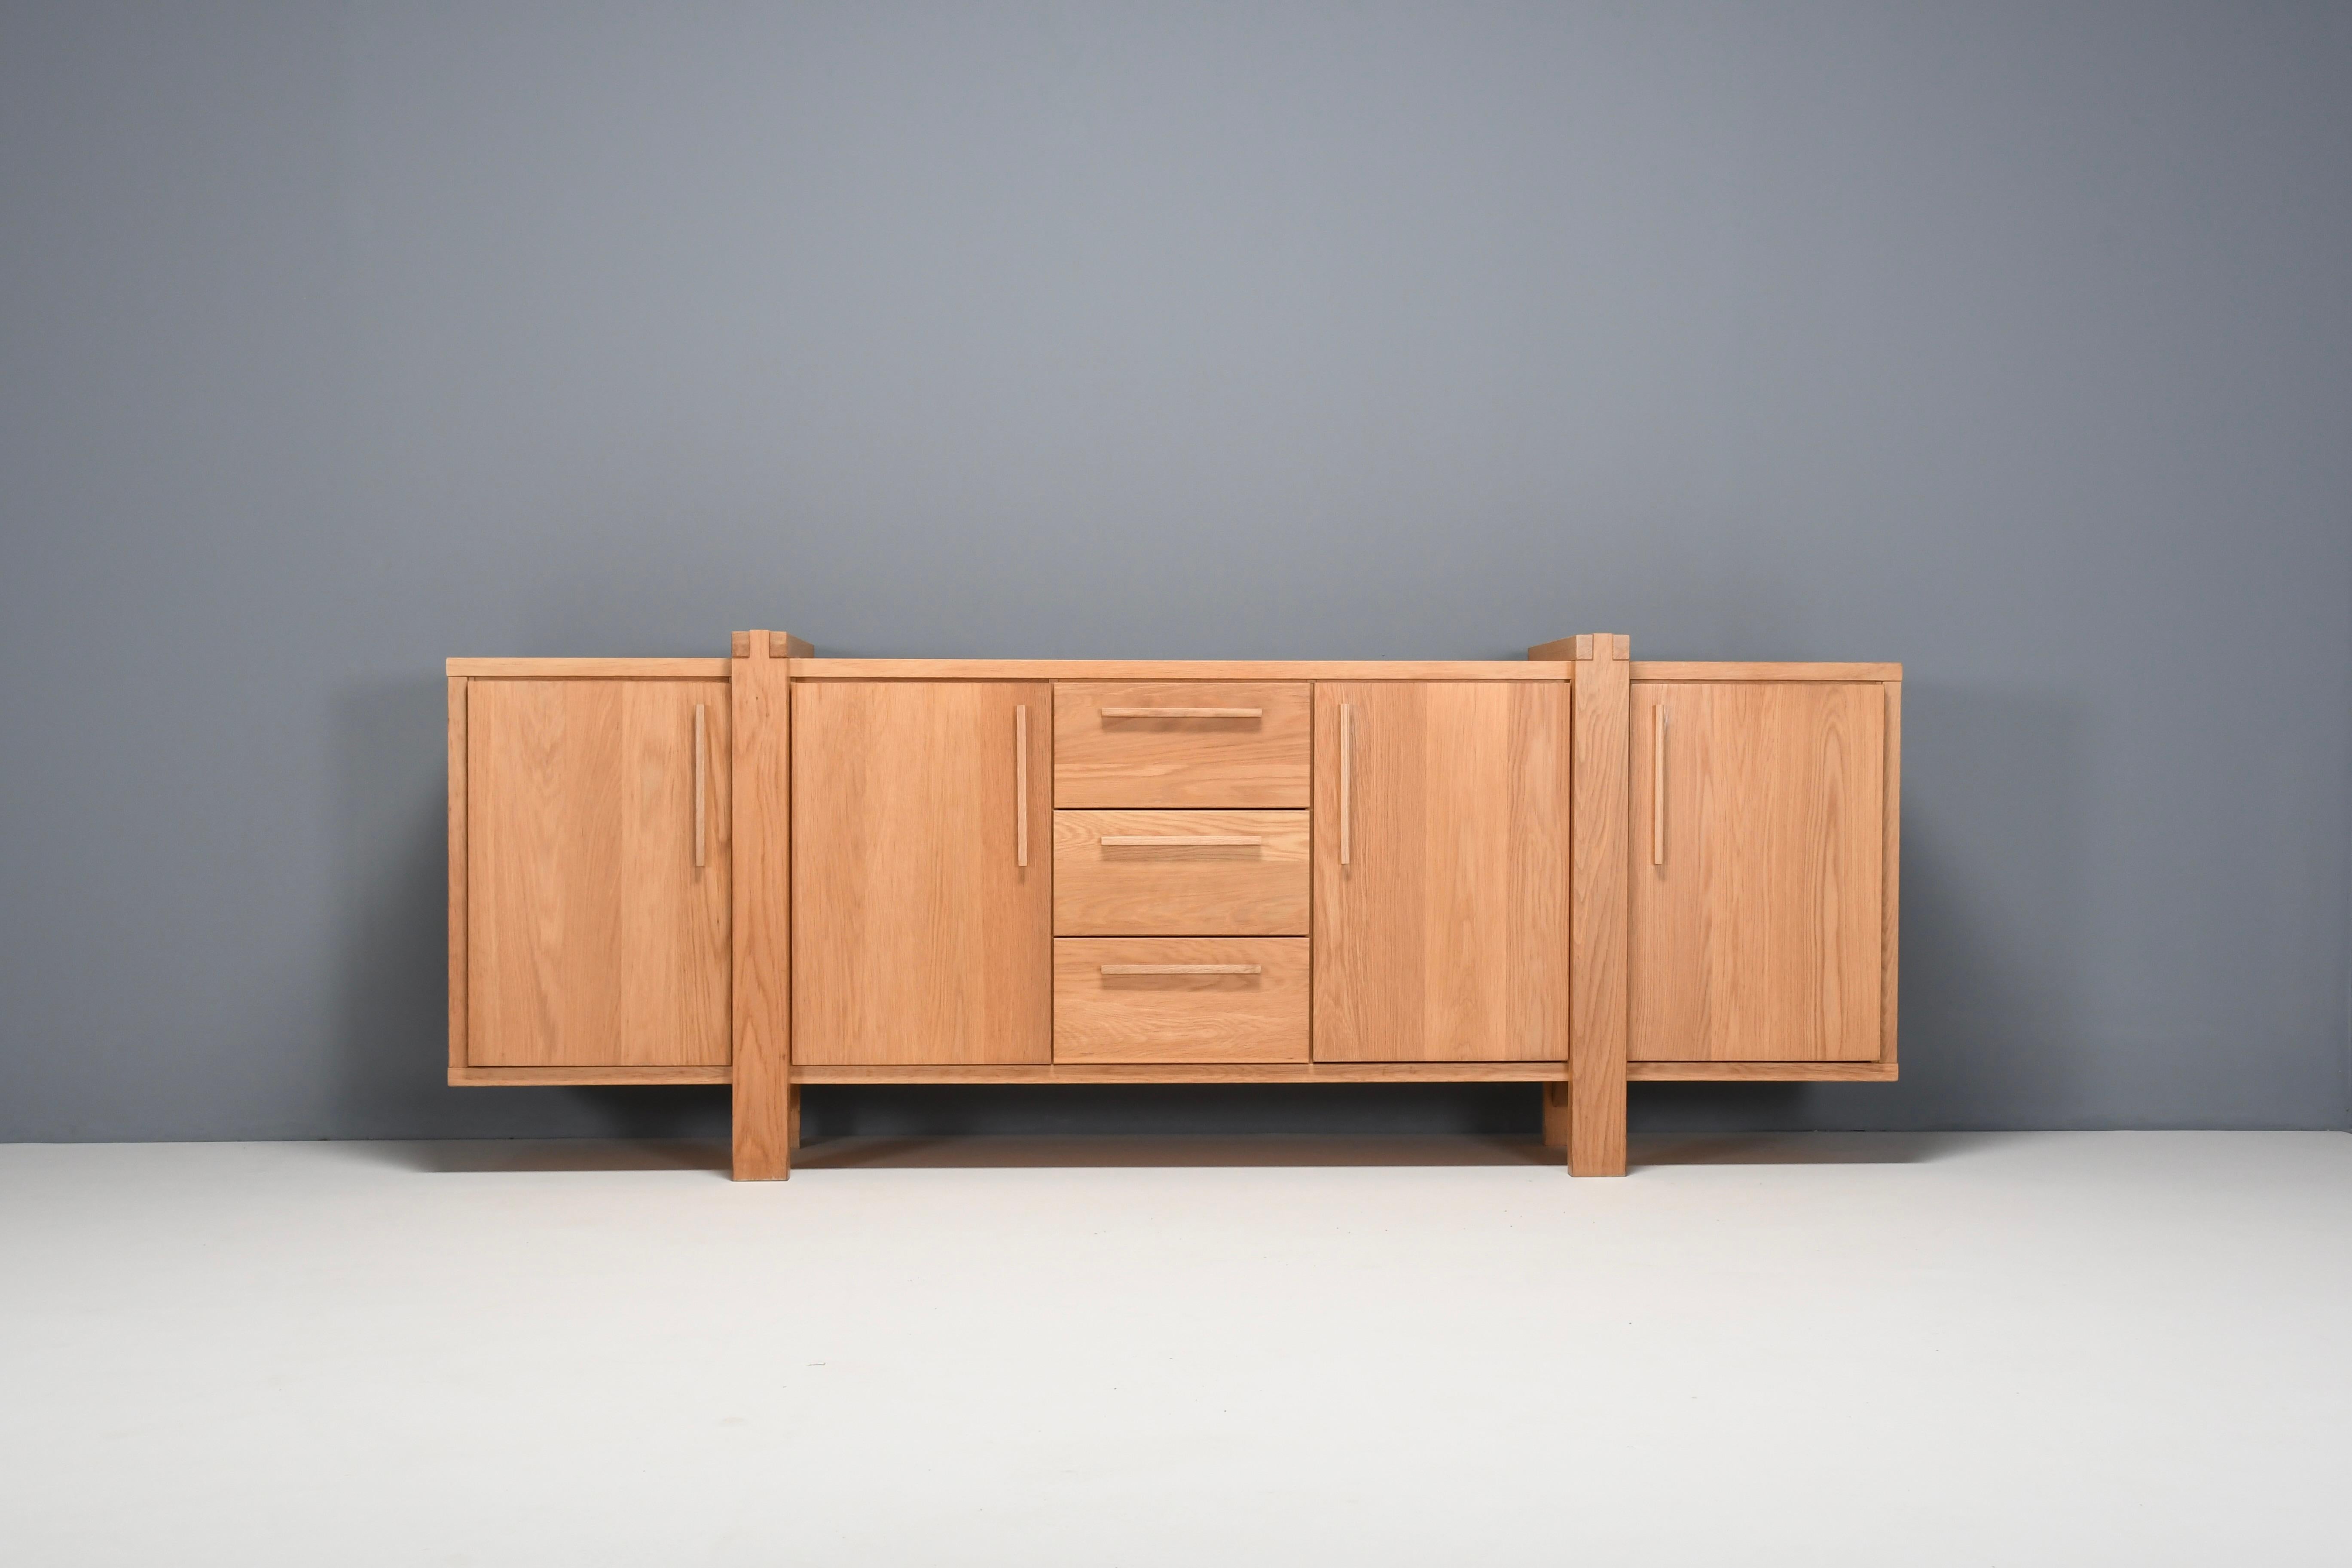 Beautifully crafted Belgian Sideboard in very good condition.

This credenza combines a simplified layout executed within a complex design, and solid construction details.

It is made in a beautiful light oak which gives the sideboard a natural